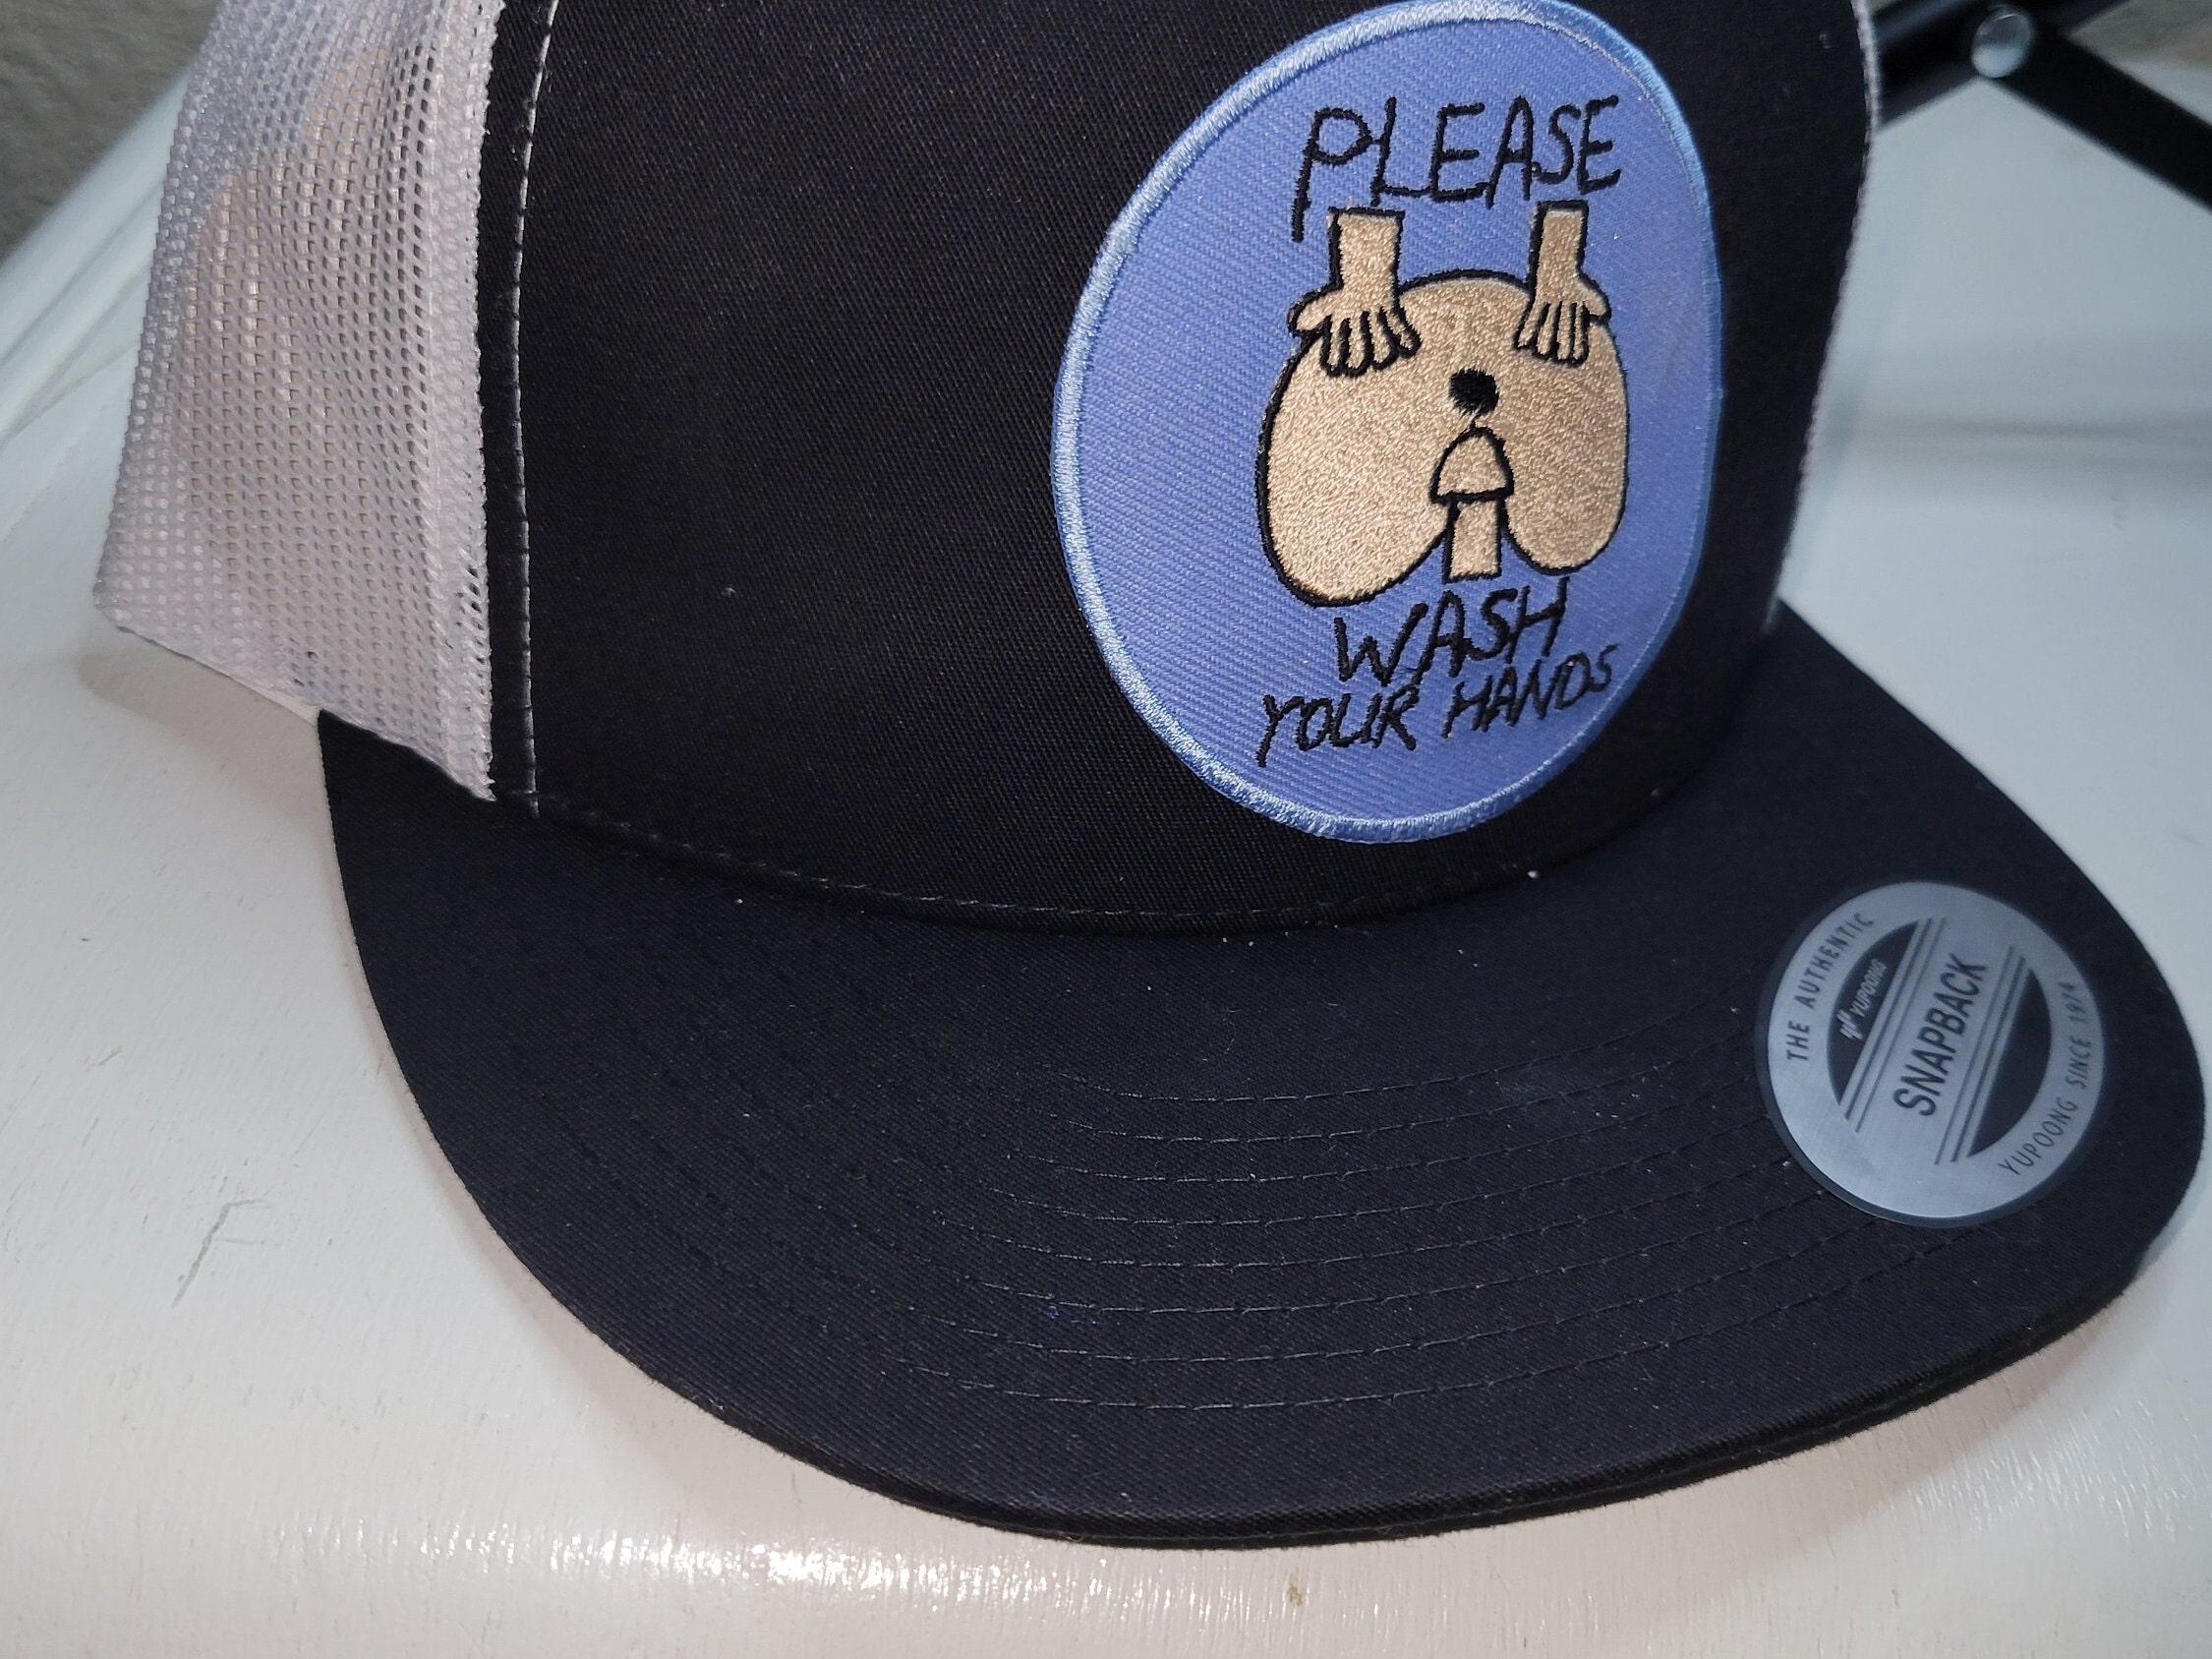 Please Wash Your Hands Funny Dirty vintage look trucker hat